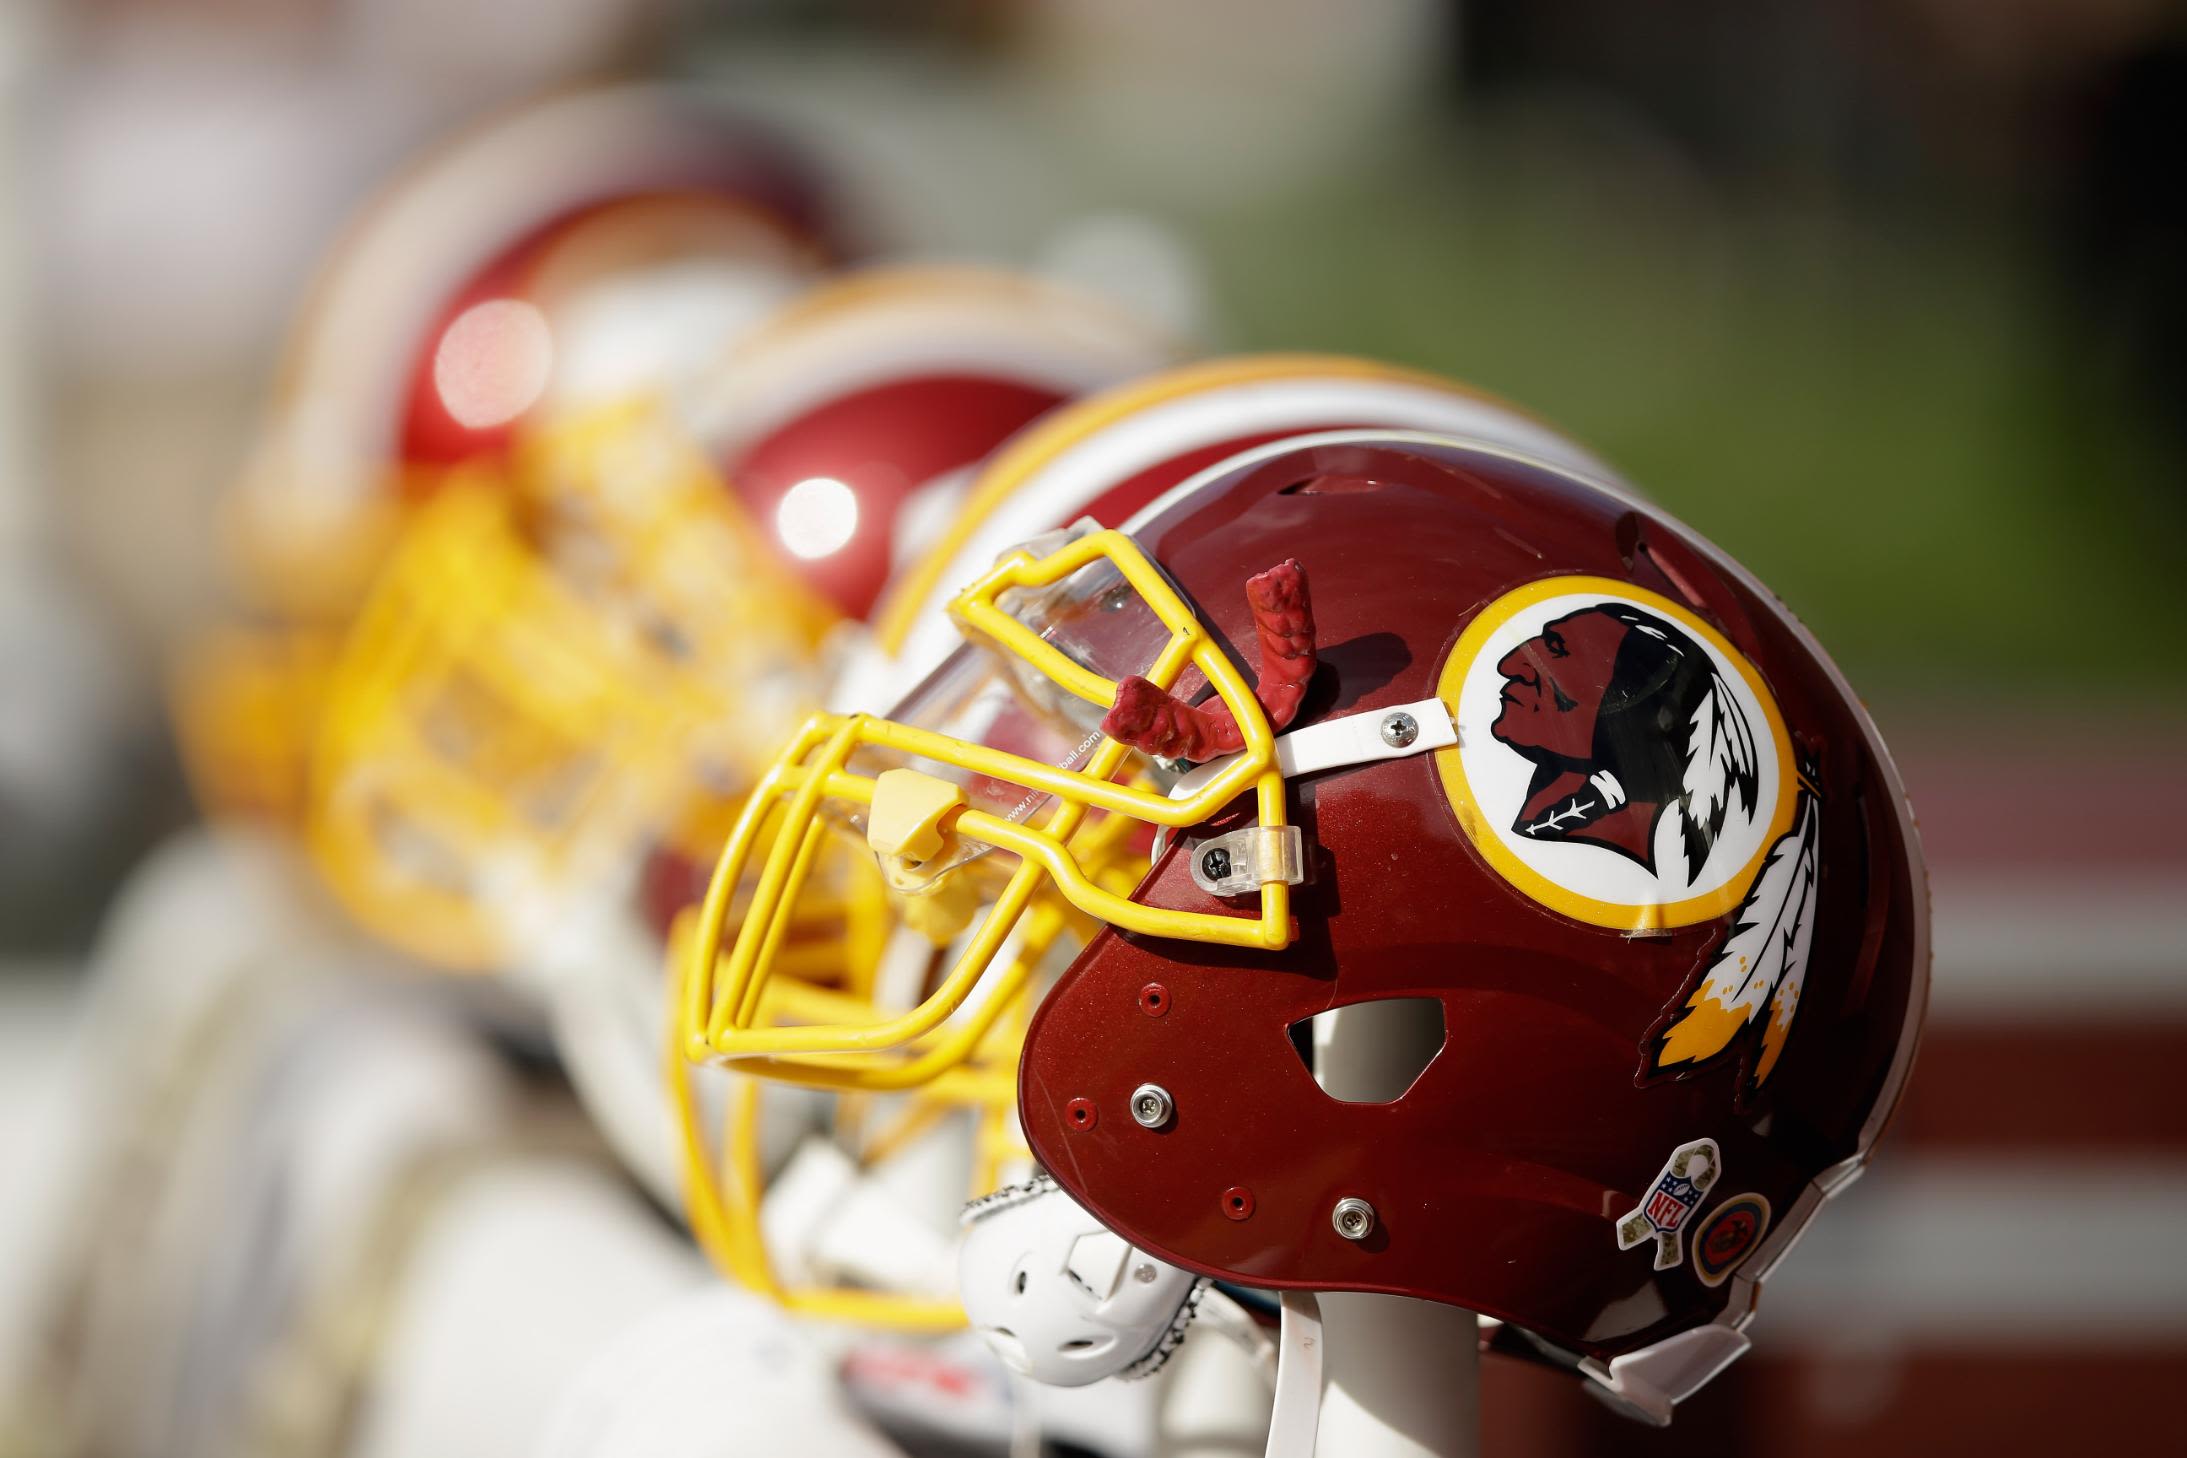 The History Behind the Washington NFL Team's Name Change